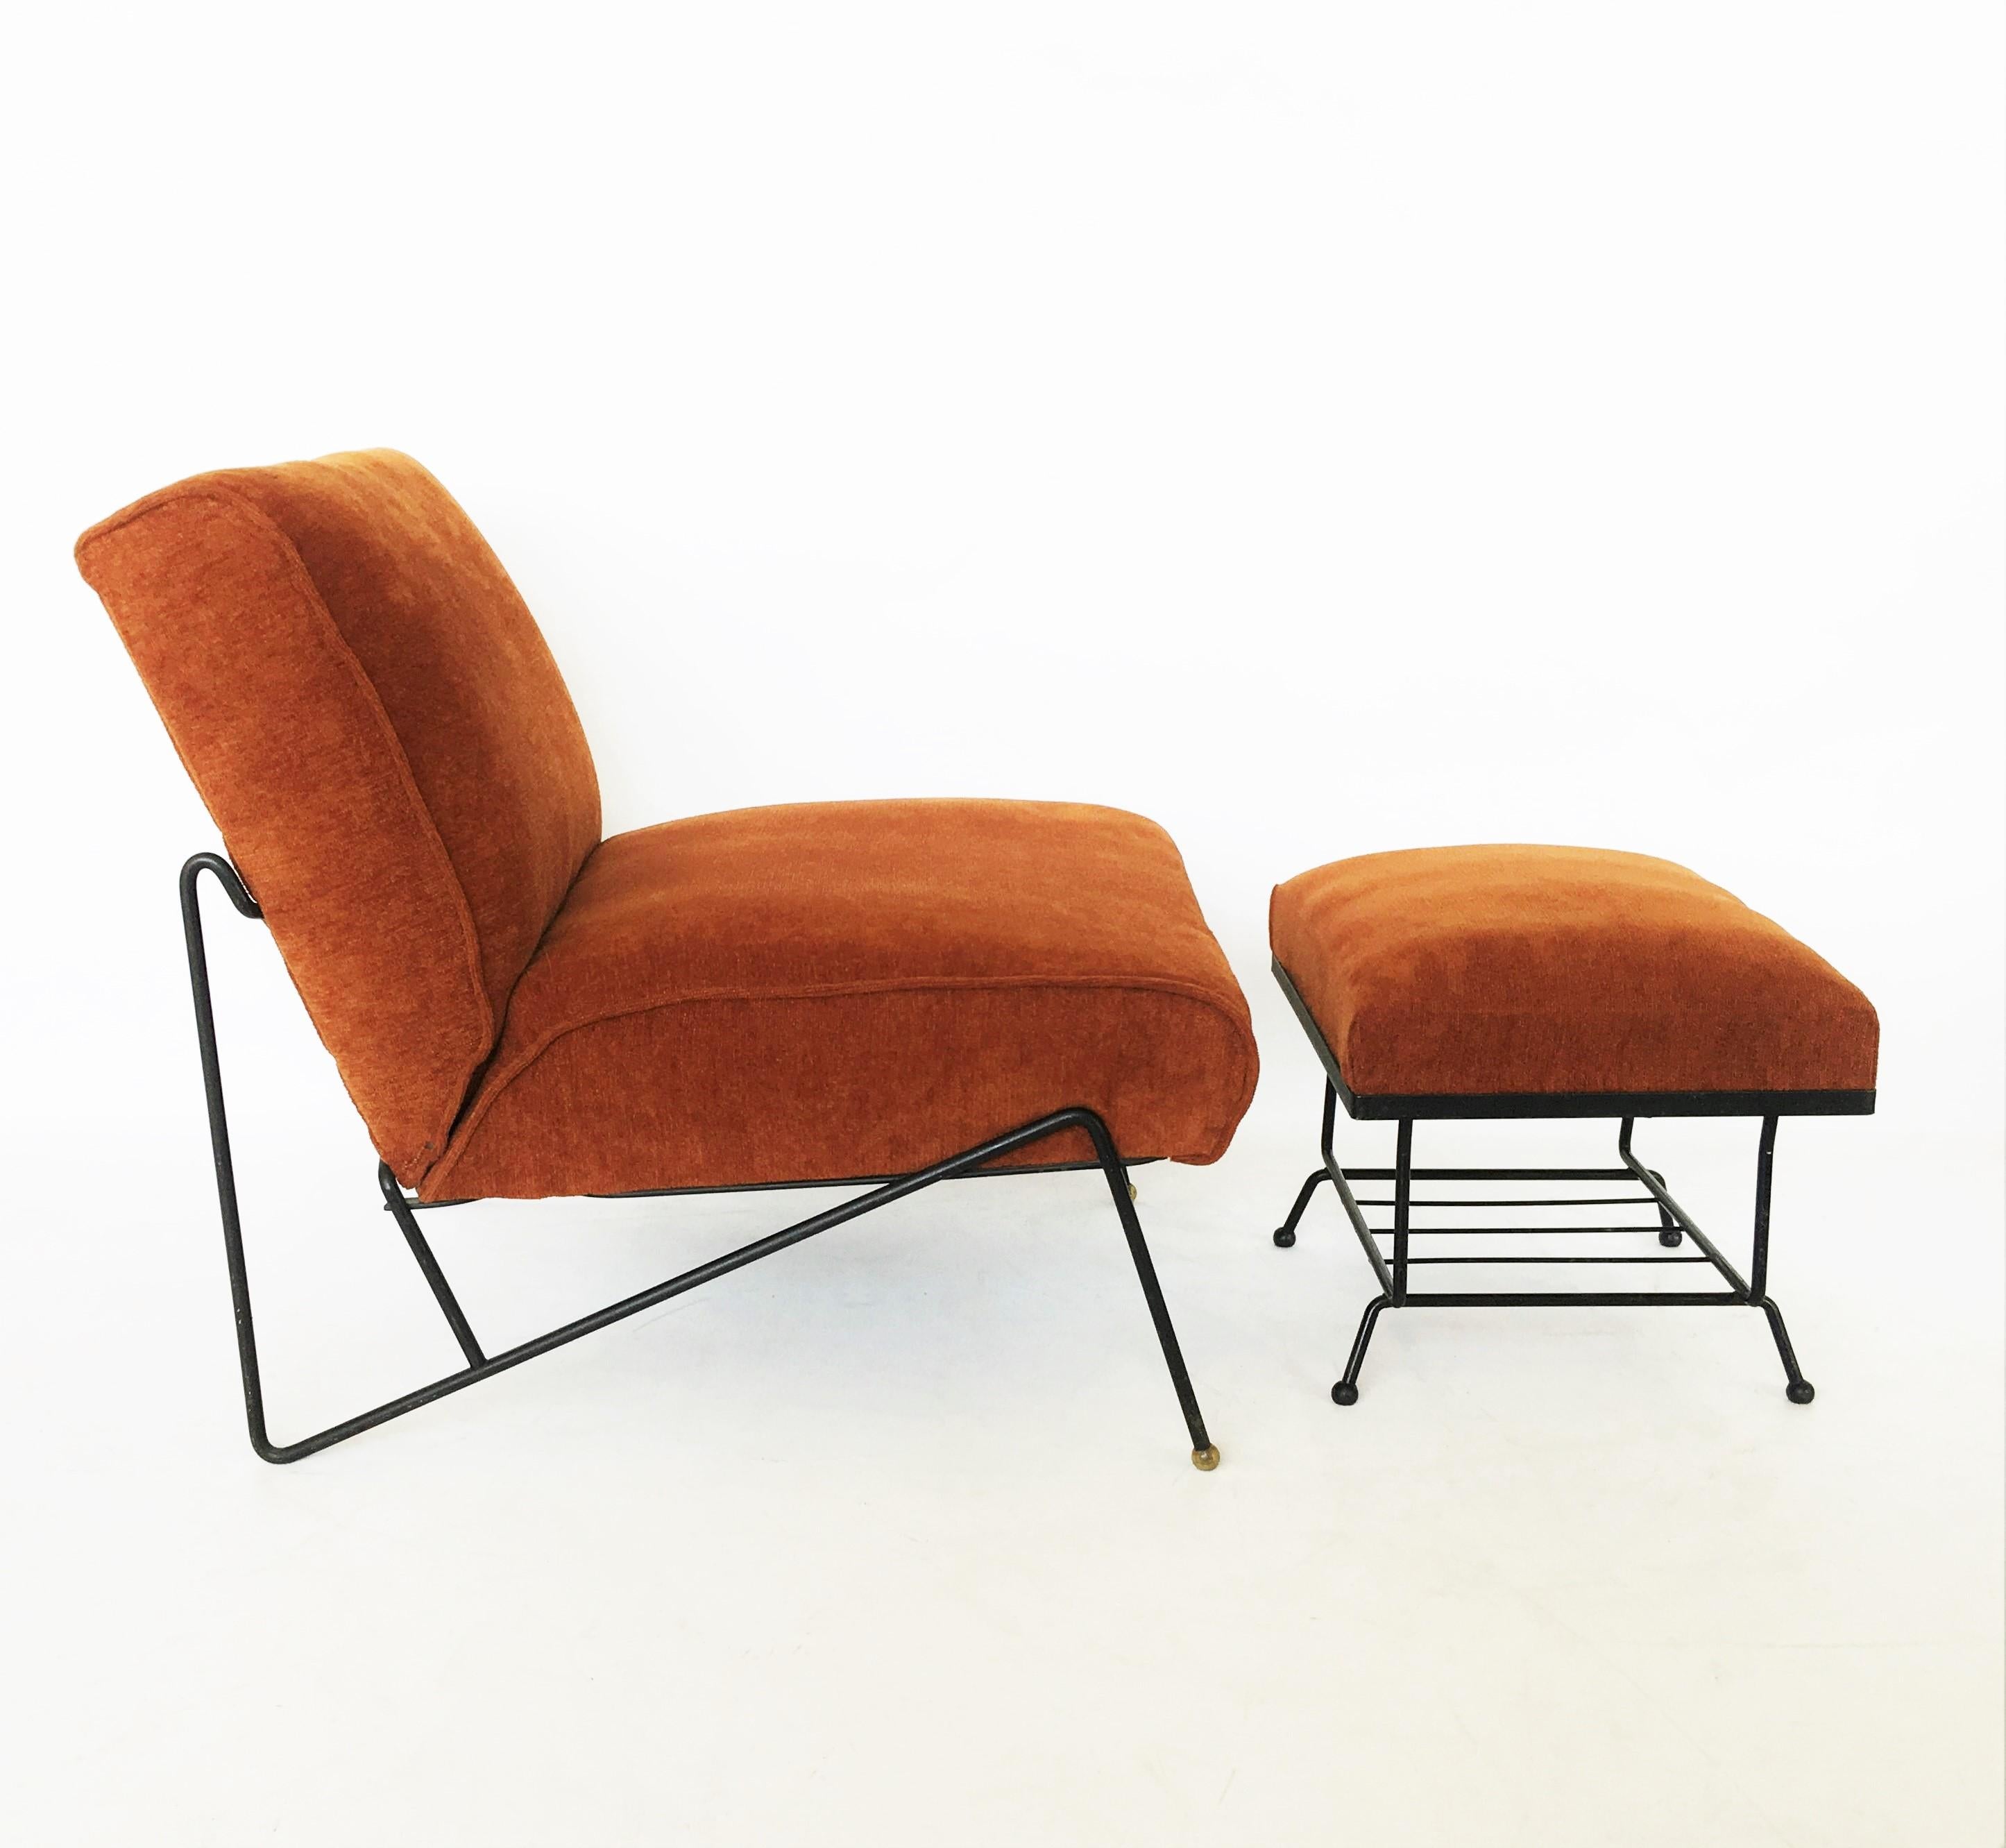 This set of lounge chair and ottoman by Dan Johnson for Pacific Iron is spectacular. Comfortable and equally fashionable, features clean lines, and a timeless design that never goes out of style. The chair has a black sculptural iron frame,